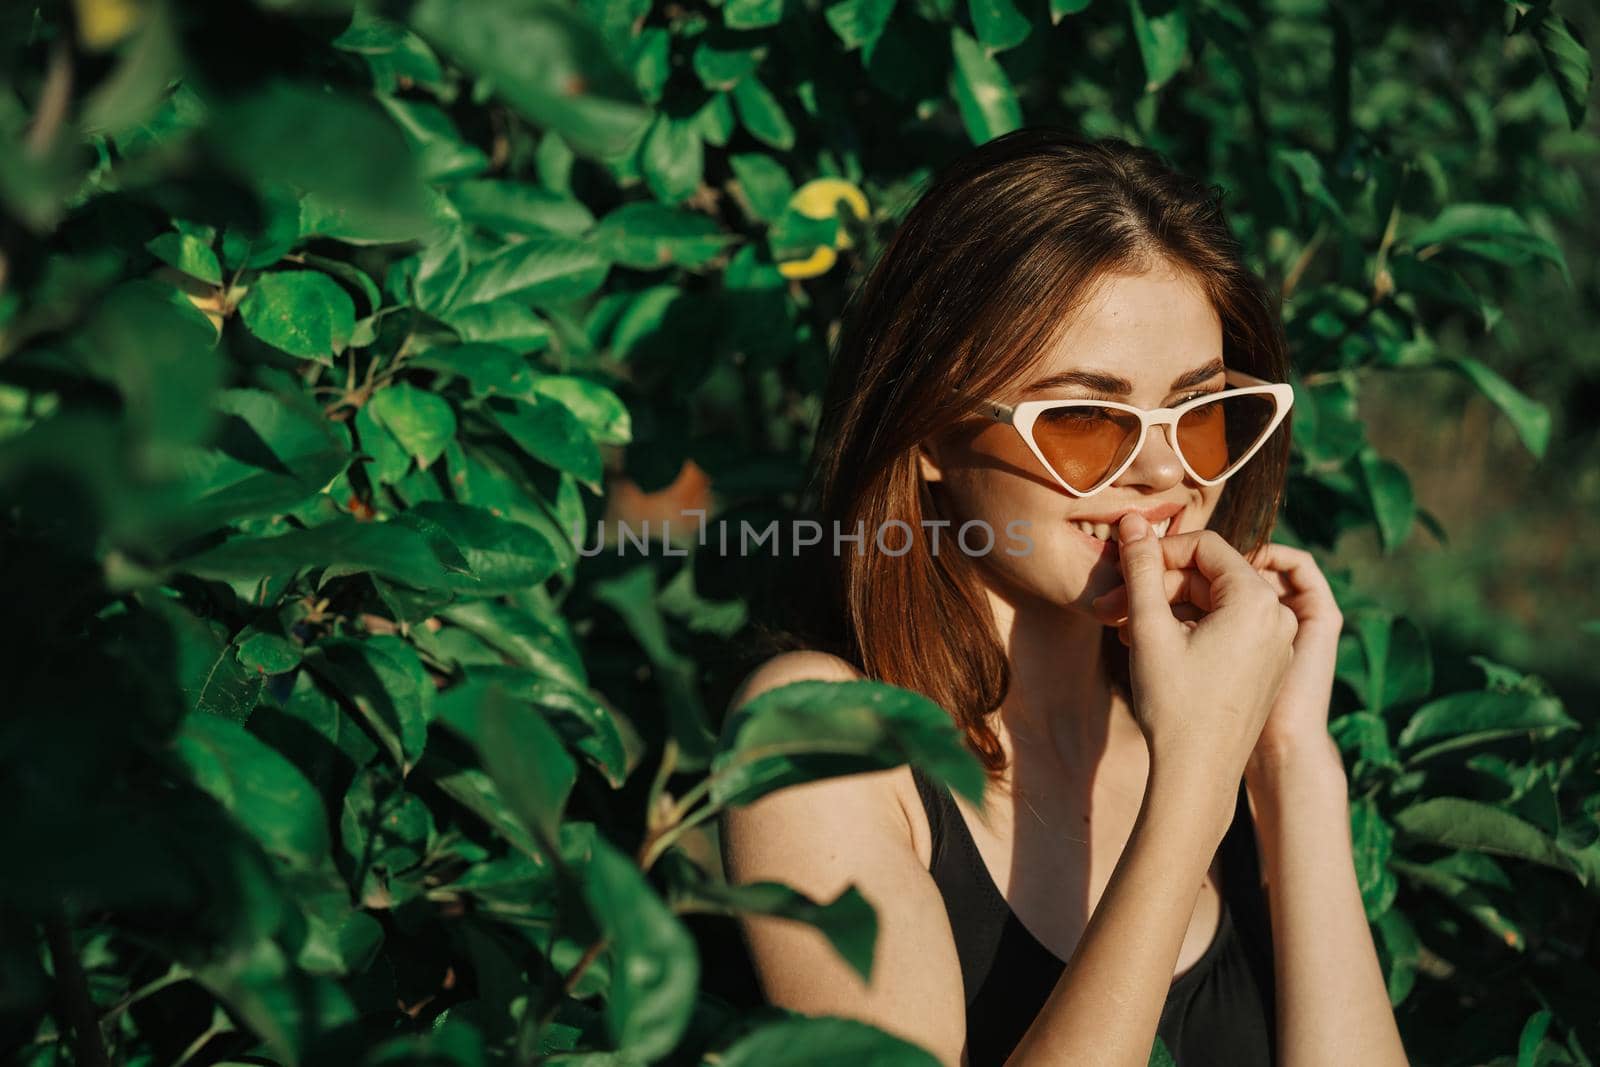 smiling woman wearing sunglasses green leaves nature fashion. High quality photo